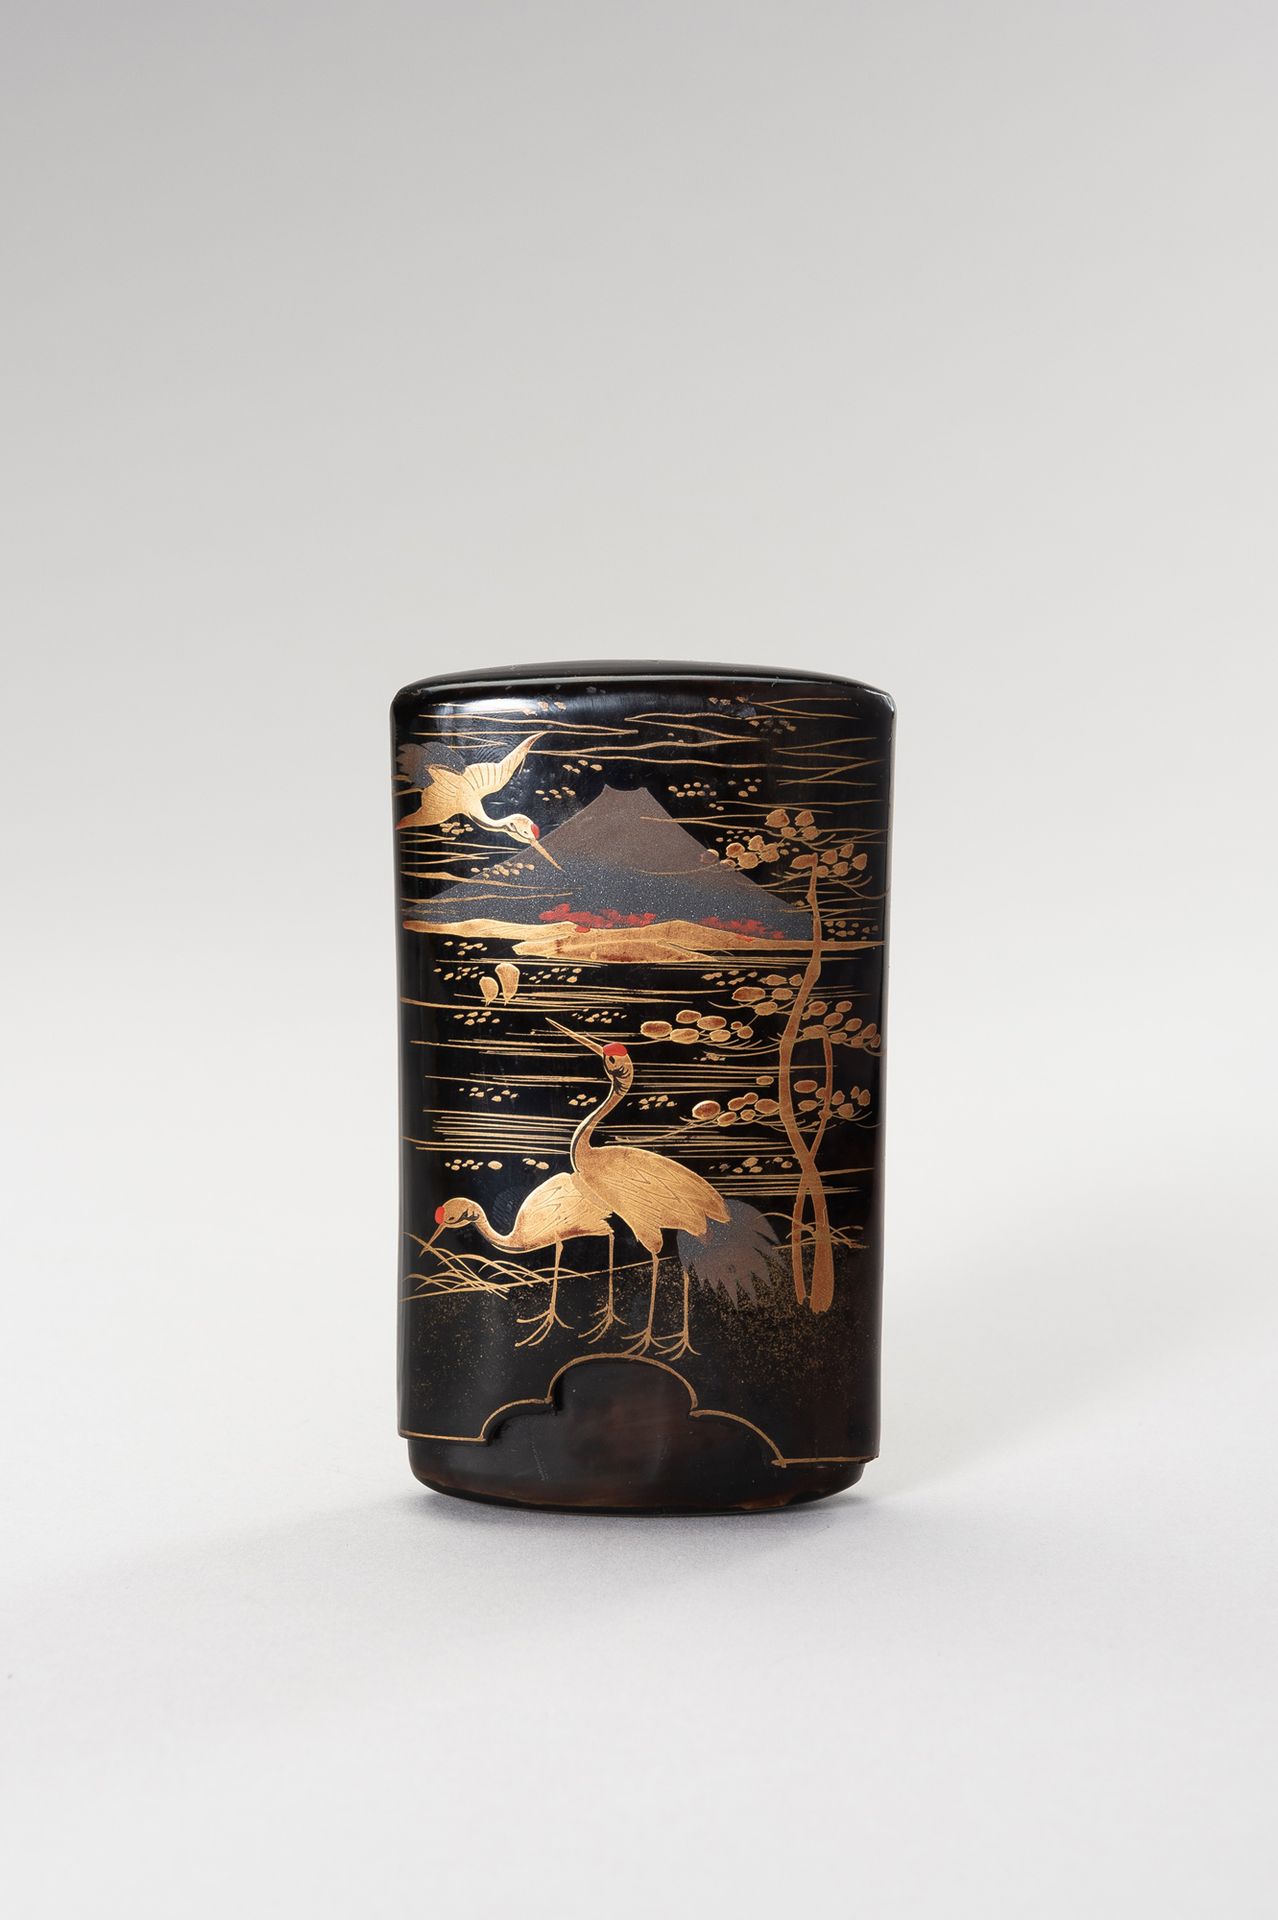 A FINE LACQUERED TORTOISESHELL CASE WITH MOUNT FUJI AND CRANES FEINES LACKIERTES&hellip;